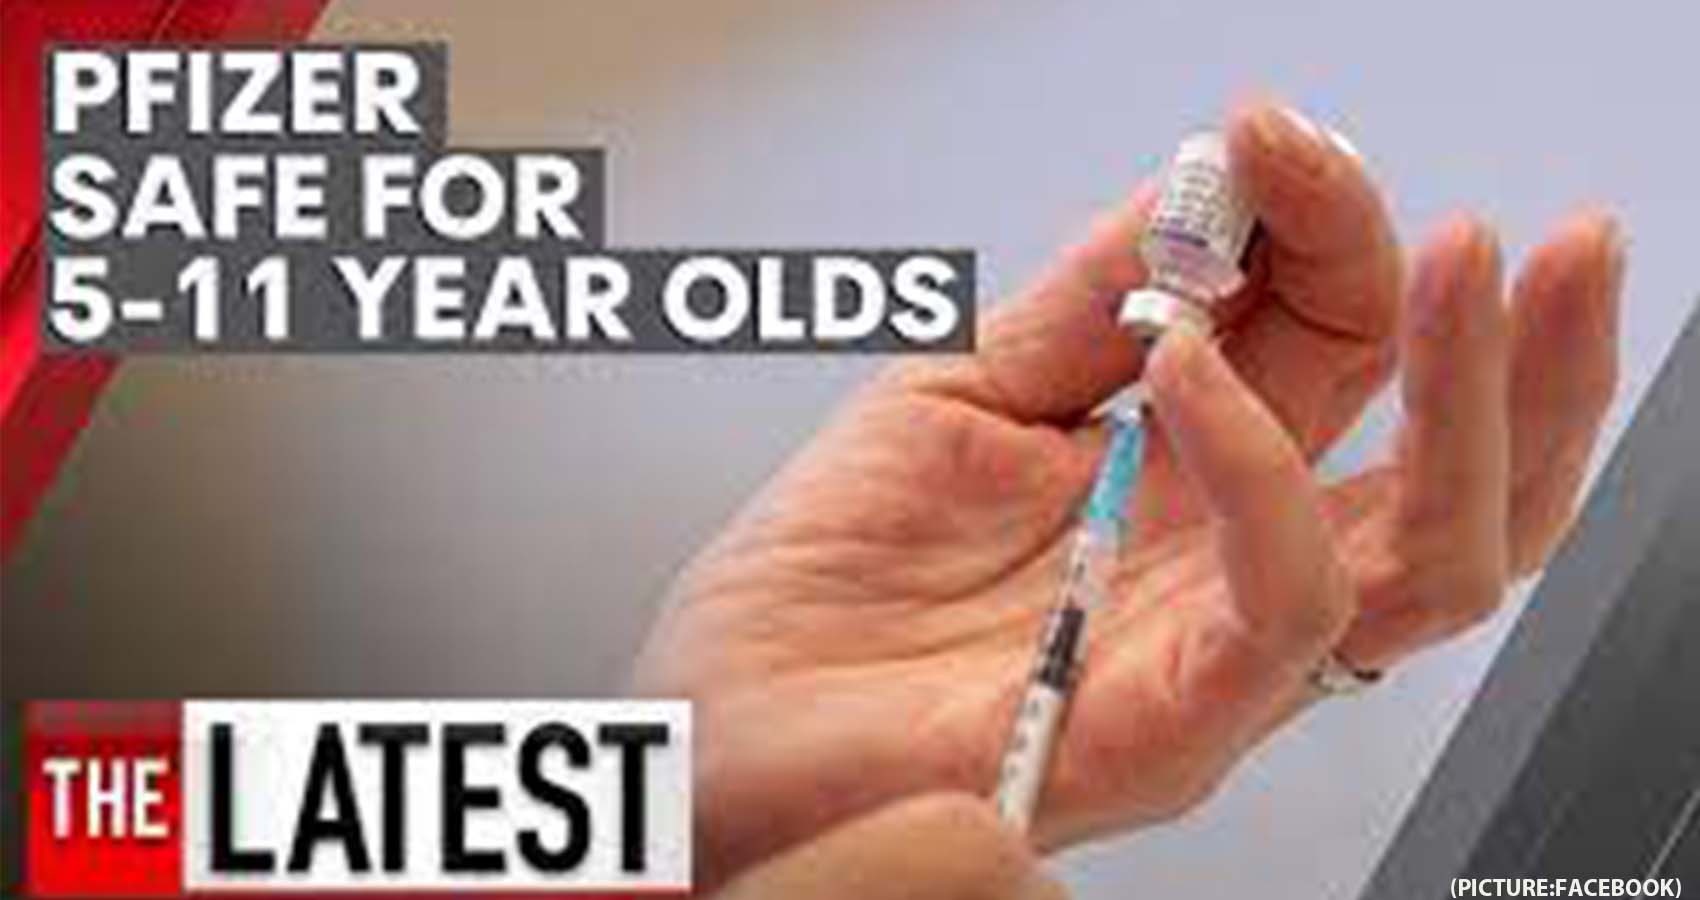 Pfizer Vaccine Has “Robust” Immune Response Among 5-11 Year Olds